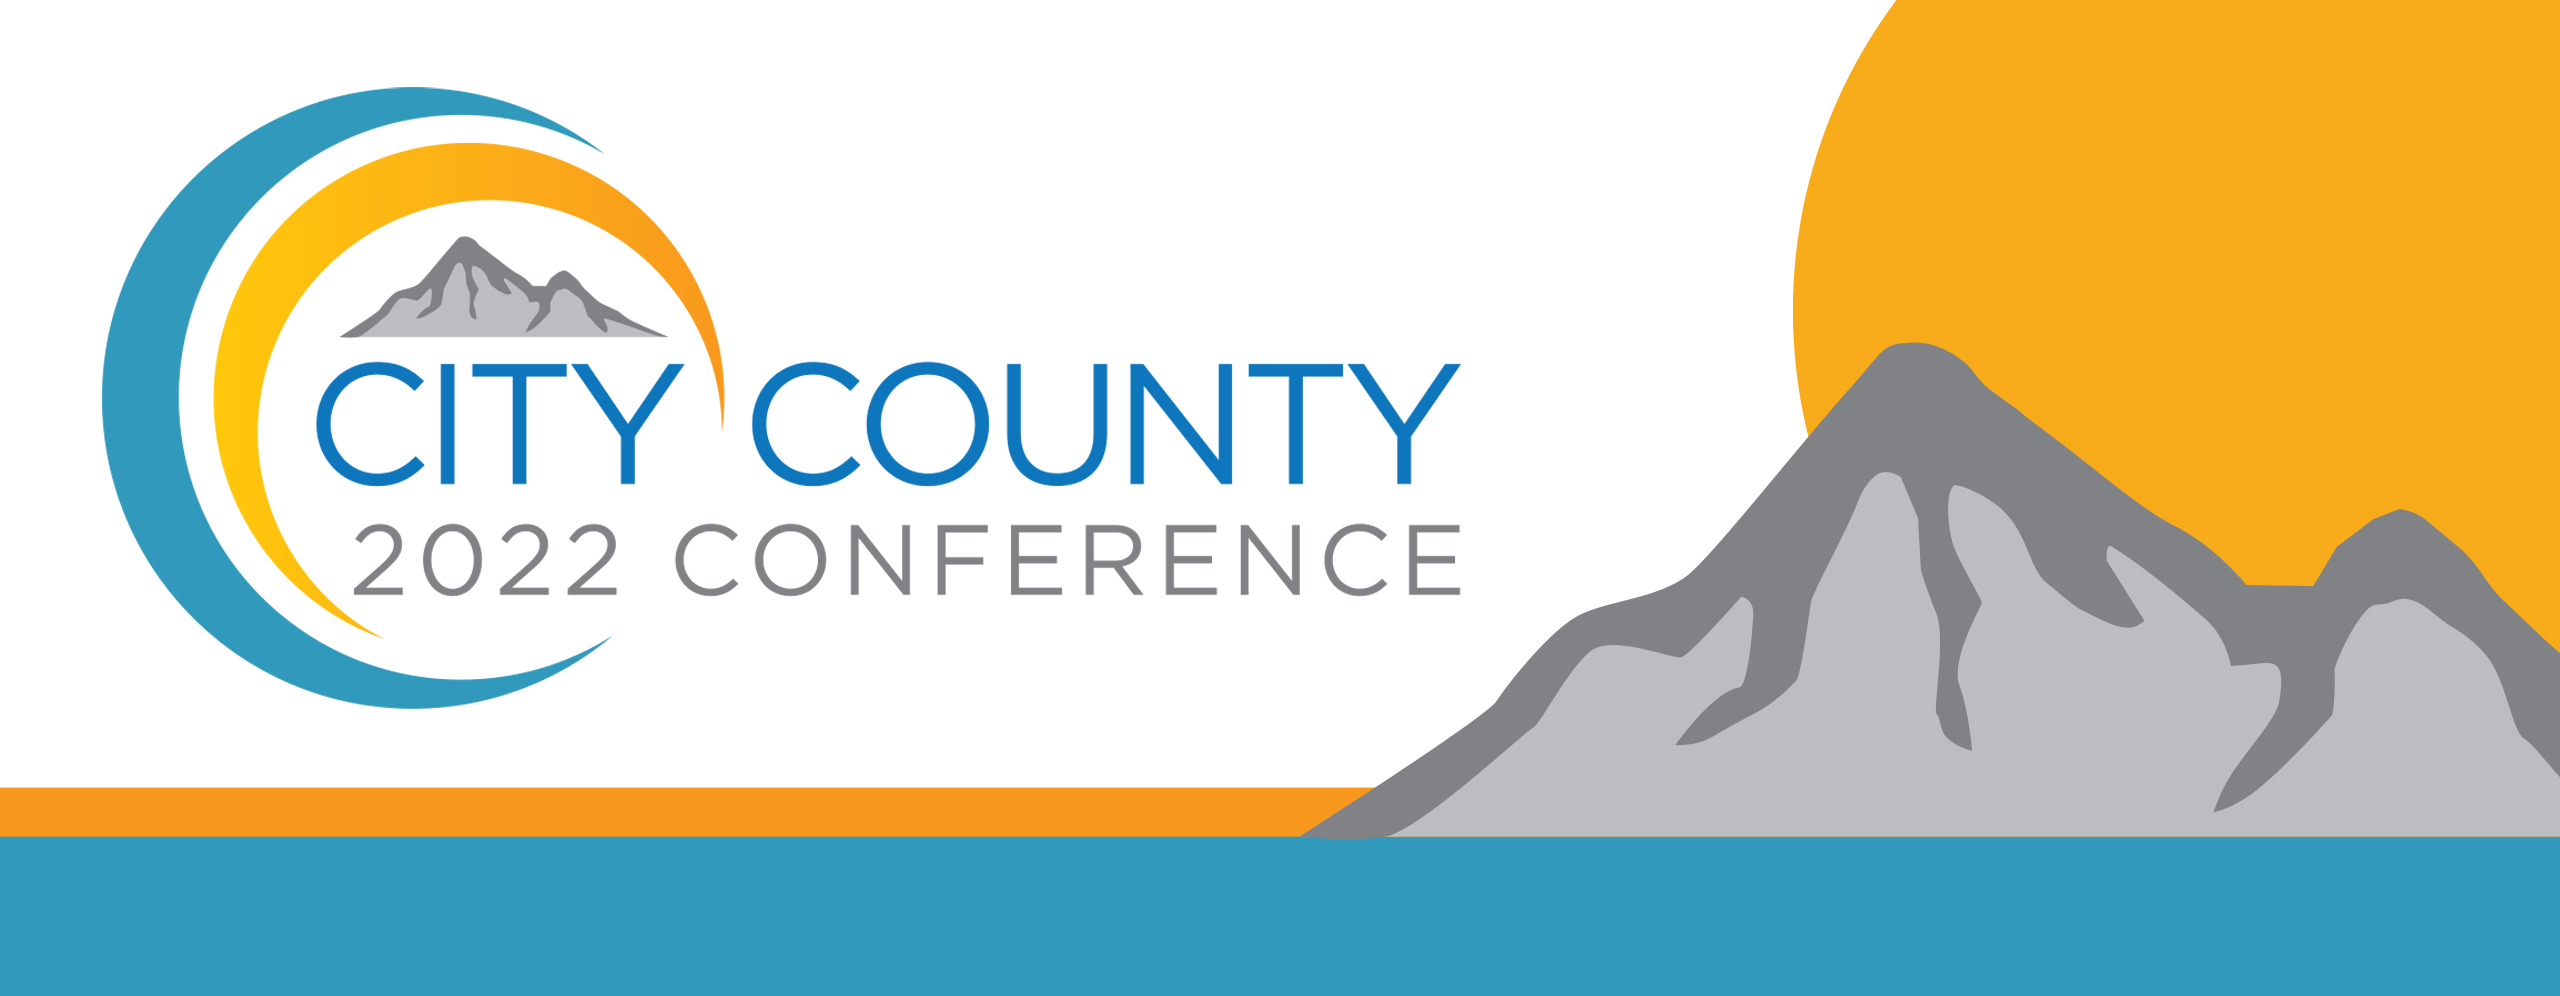 City County 2022 Conference